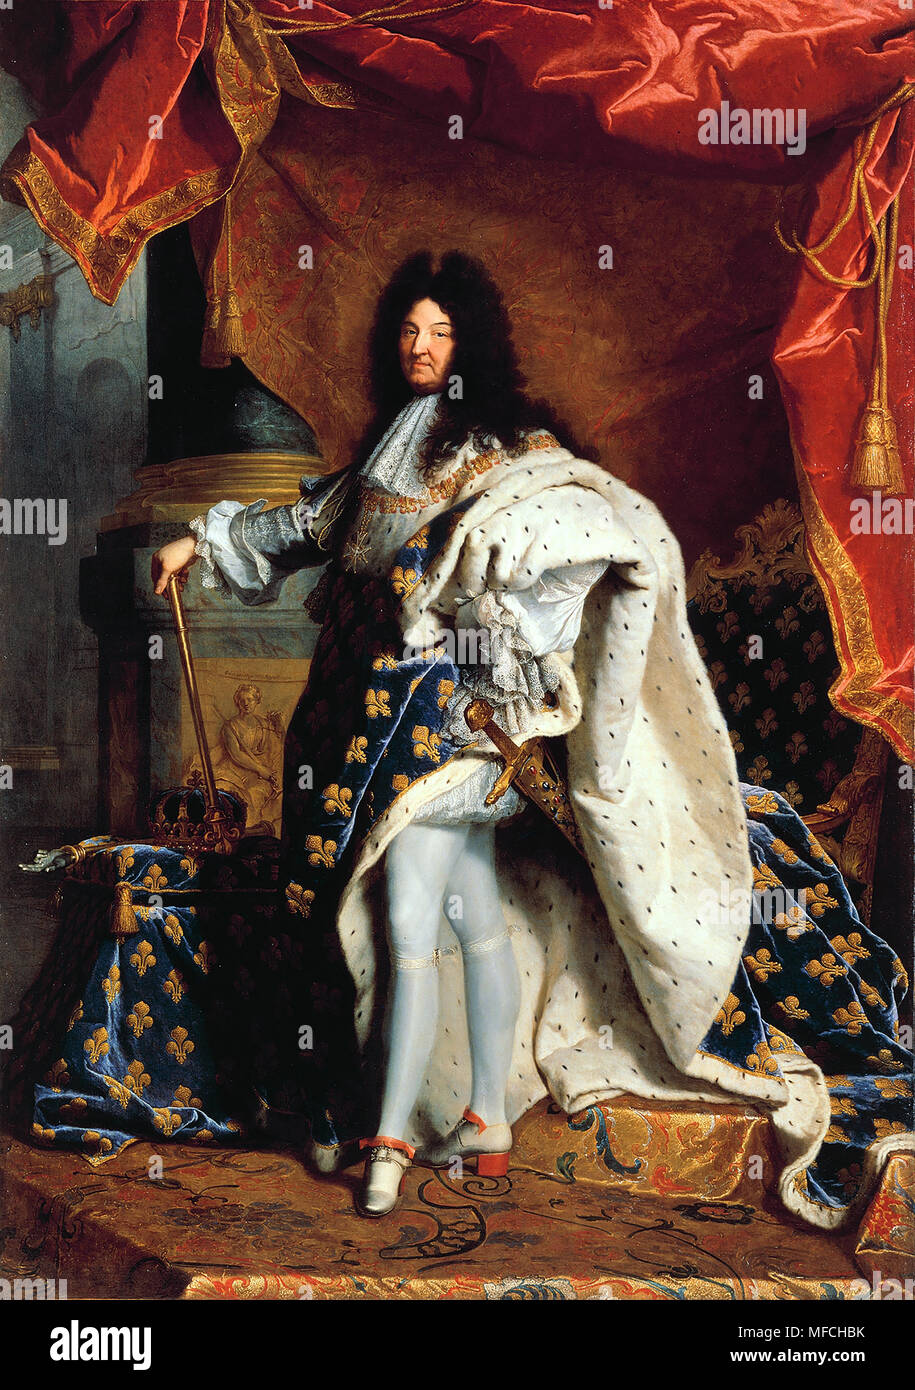 Portrait of Louis XIV of France  by Hyacinthe Rigaud, 1701,Louvre, Paris, France, oil on canvas Stock Photo